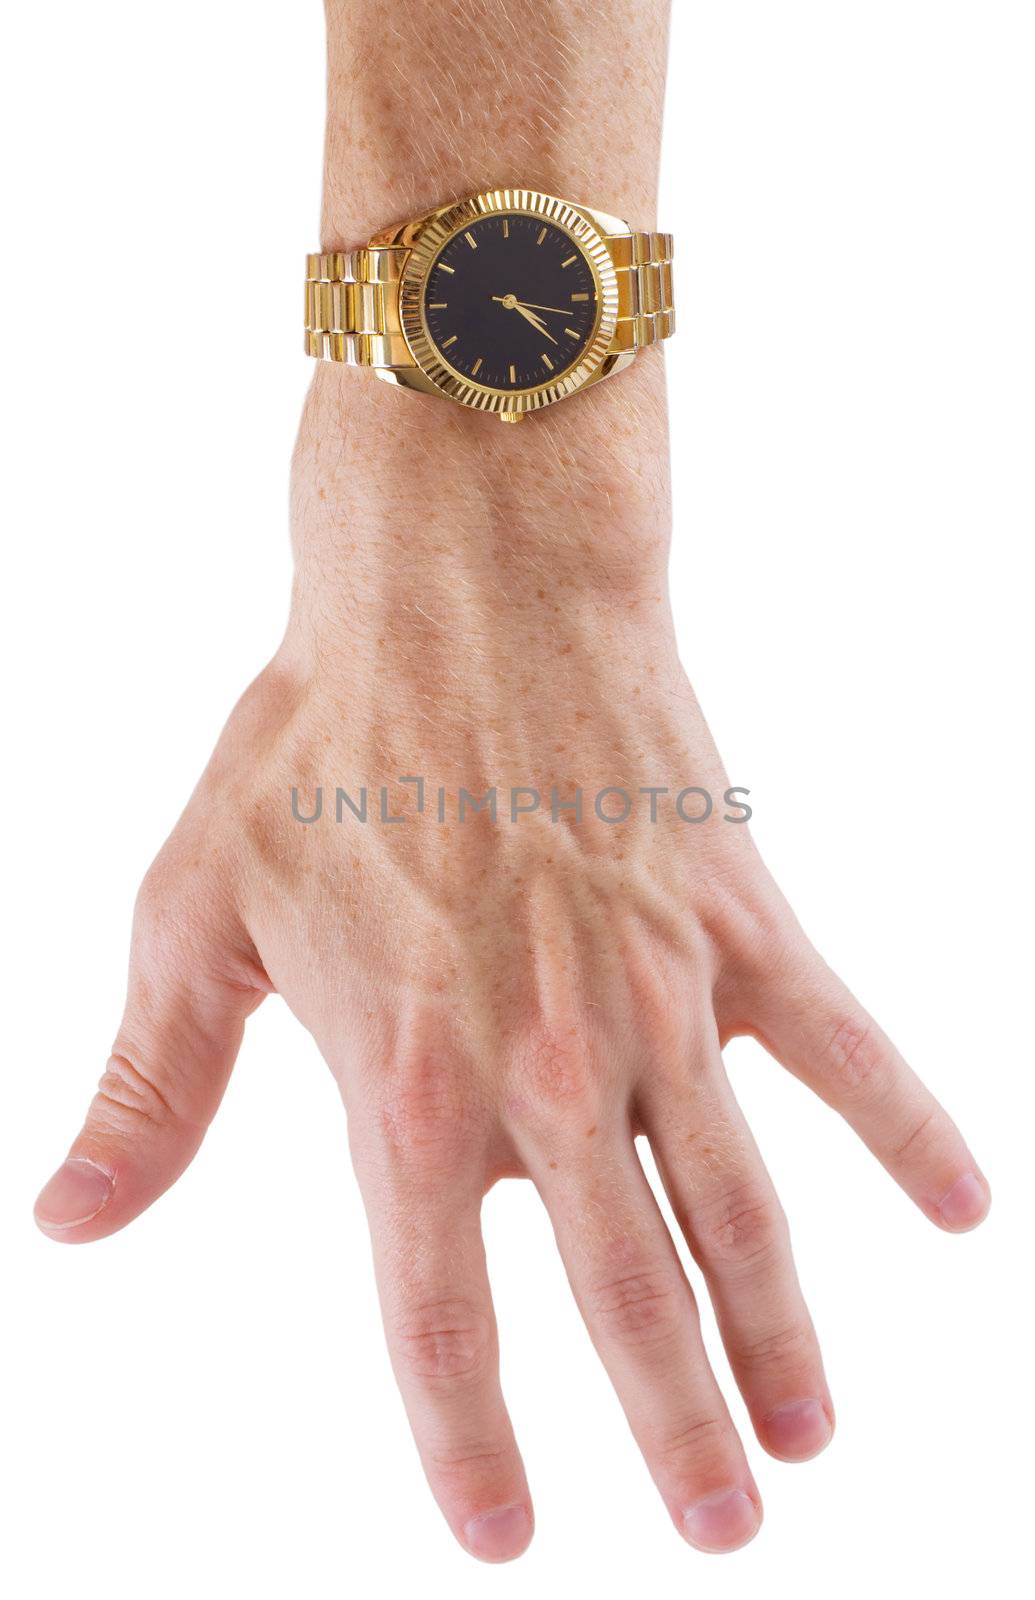 Man's hand with gilt watch on a white background